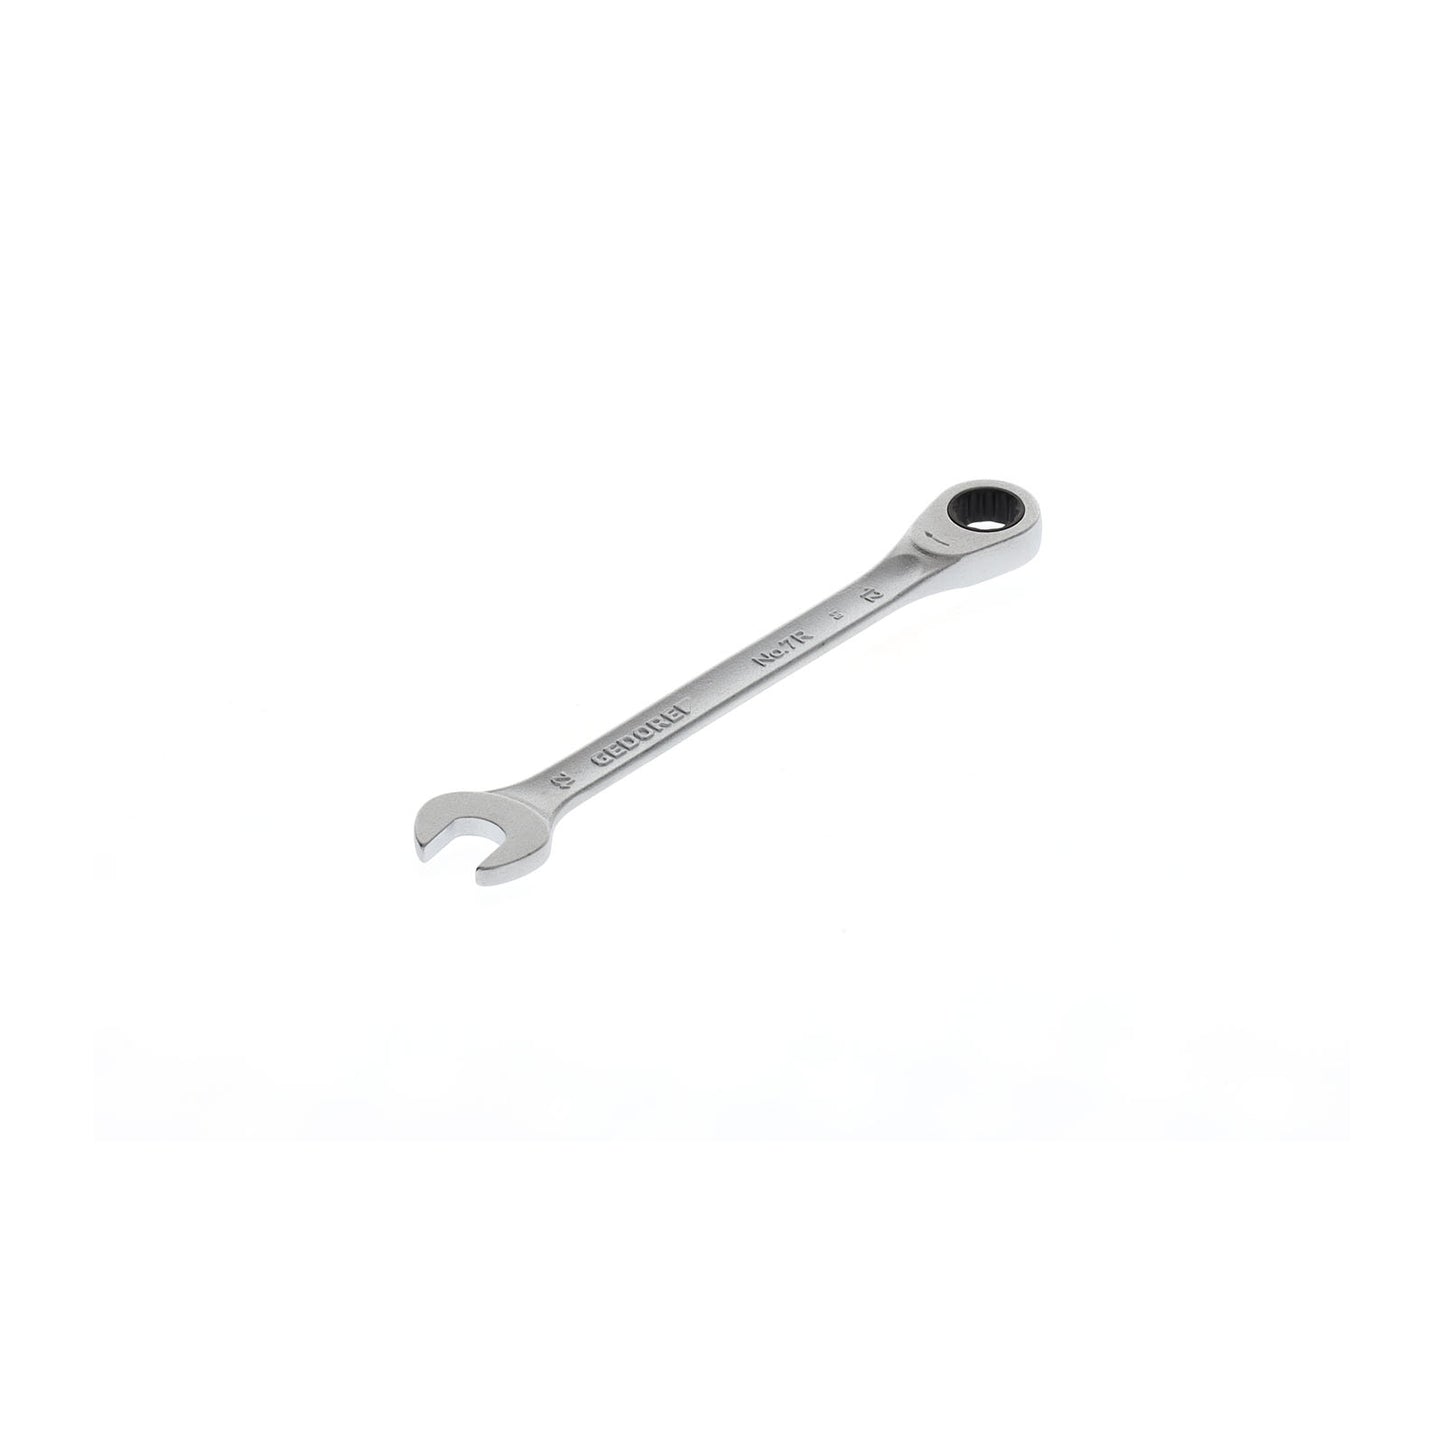 GEDORE 7 R 12 - Ratchet combination wrench, 12mm (2297108)